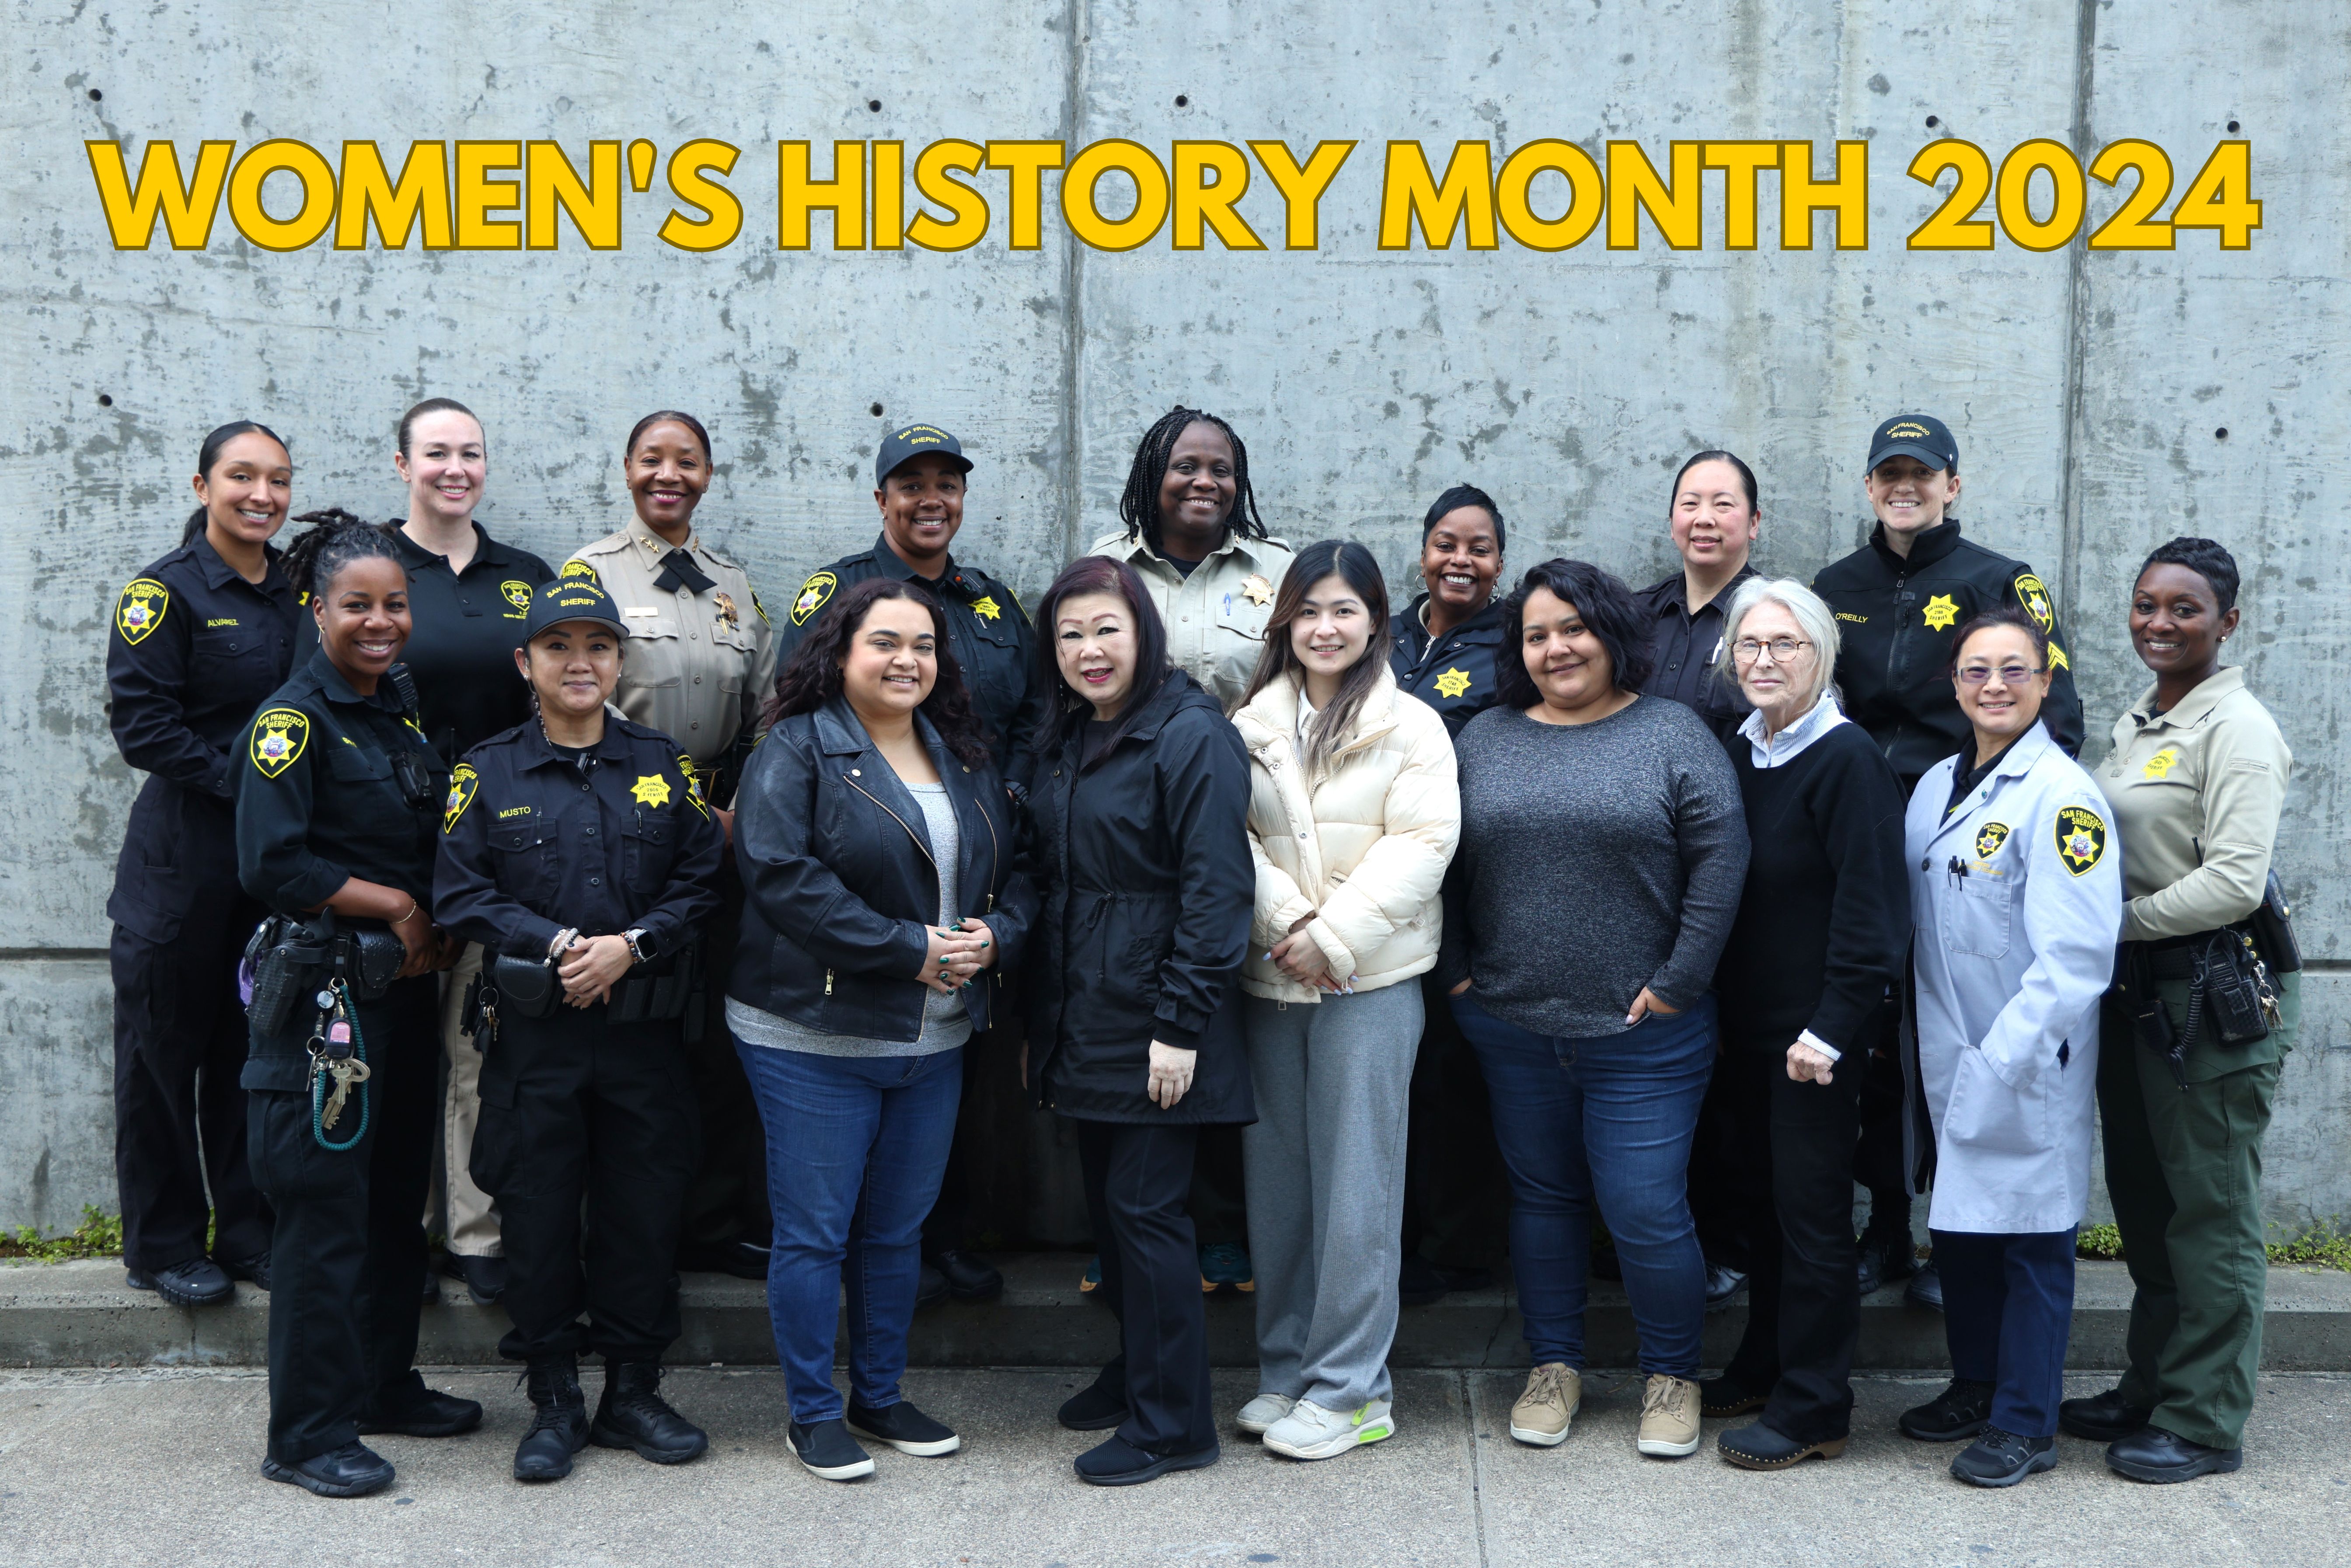 The Sheriff's Office celebrates Women's History Month! Looking for a challenging and rewarding career? We want YOU! Our deputies work in the jails, streets, courts & City buildings. Visit the Join Our Team page to learn more. 